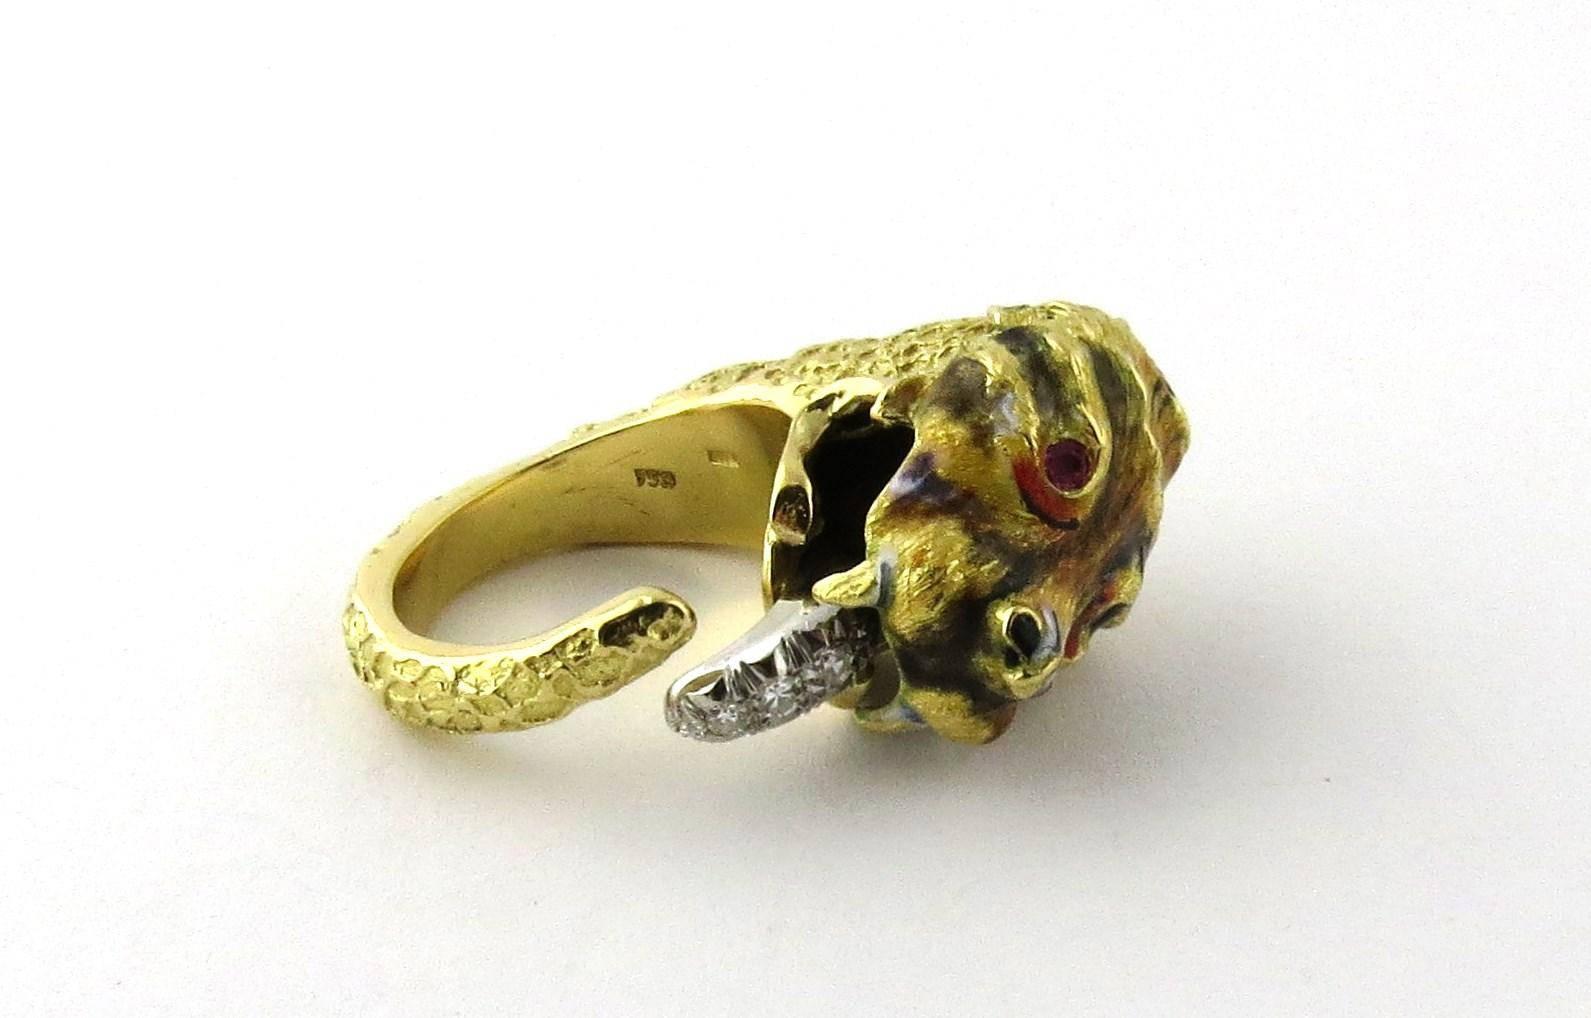 Vintage 18K Yellow Gold Tiger Ring 

Diamond Tongue Ruby Eyes

 Size 5.75 

2 ruby eyes

 3 Single cut diamonds on tongue

 35 mm in diameter

 13.4 g 

8.6 dwt

 Marked 750

 Very good pre owned condition

 All of our items are packaged securely